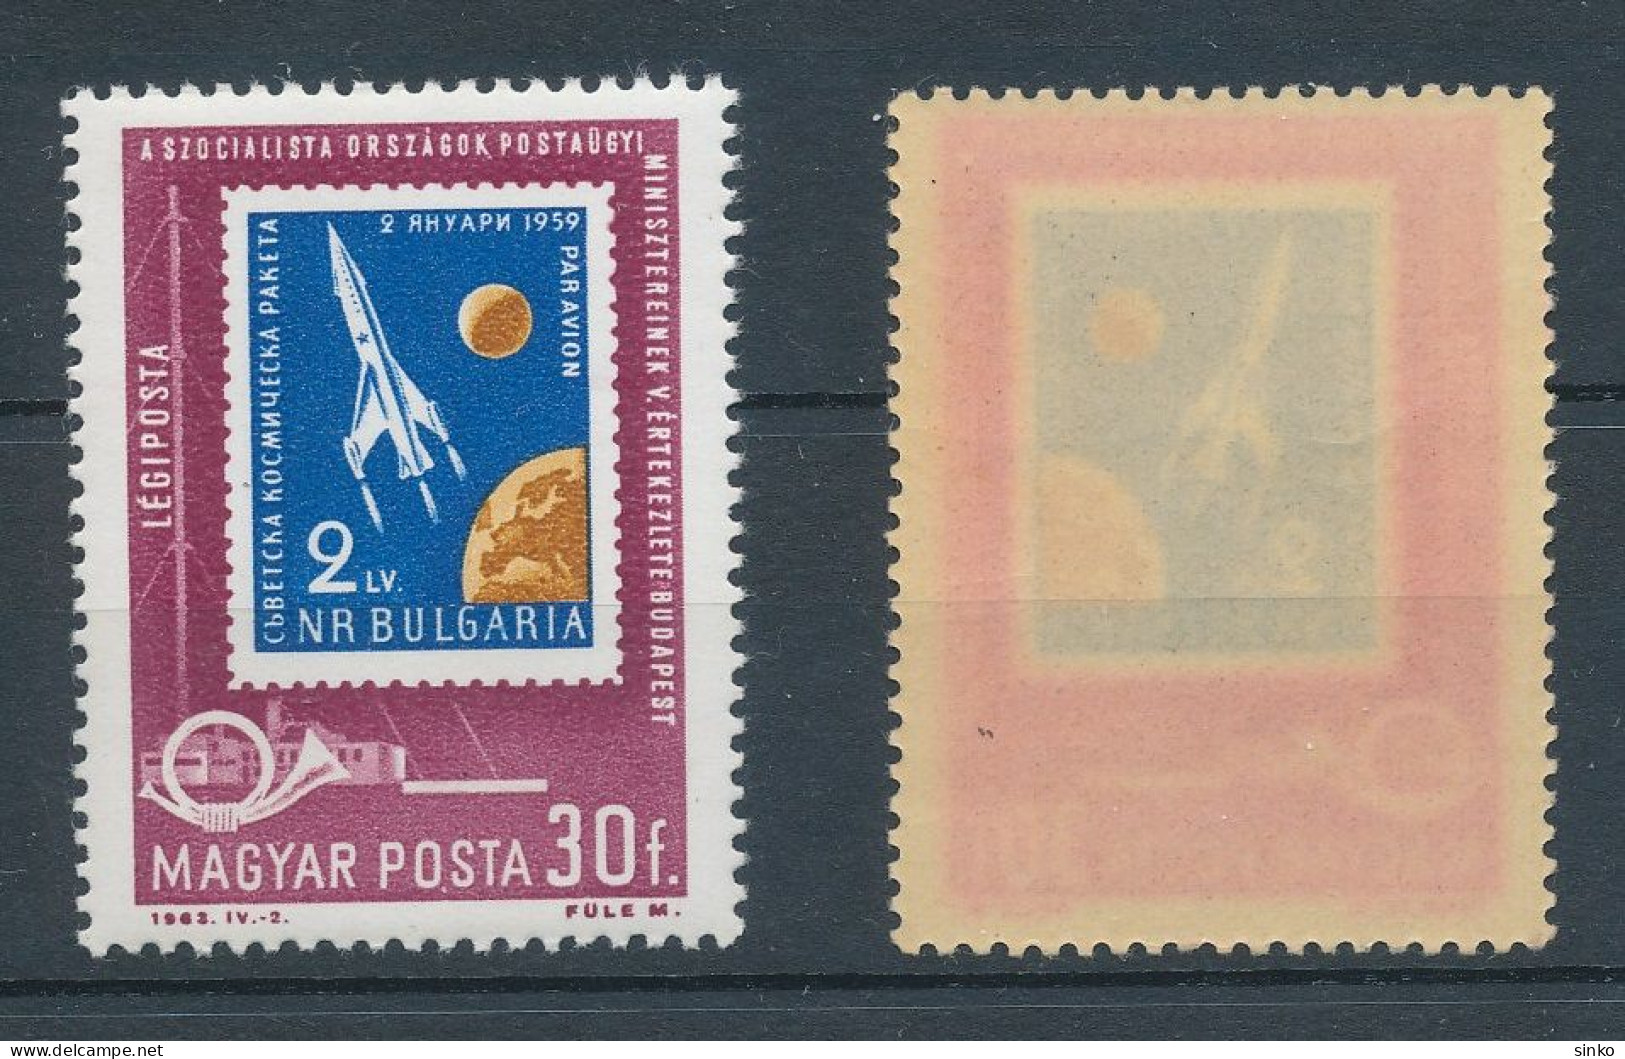 1963. Organization Of Socialist Countries Postal Administrations Conference (IV.) - Budapest - L - Misprint - Errors, Freaks & Oddities (EFO)